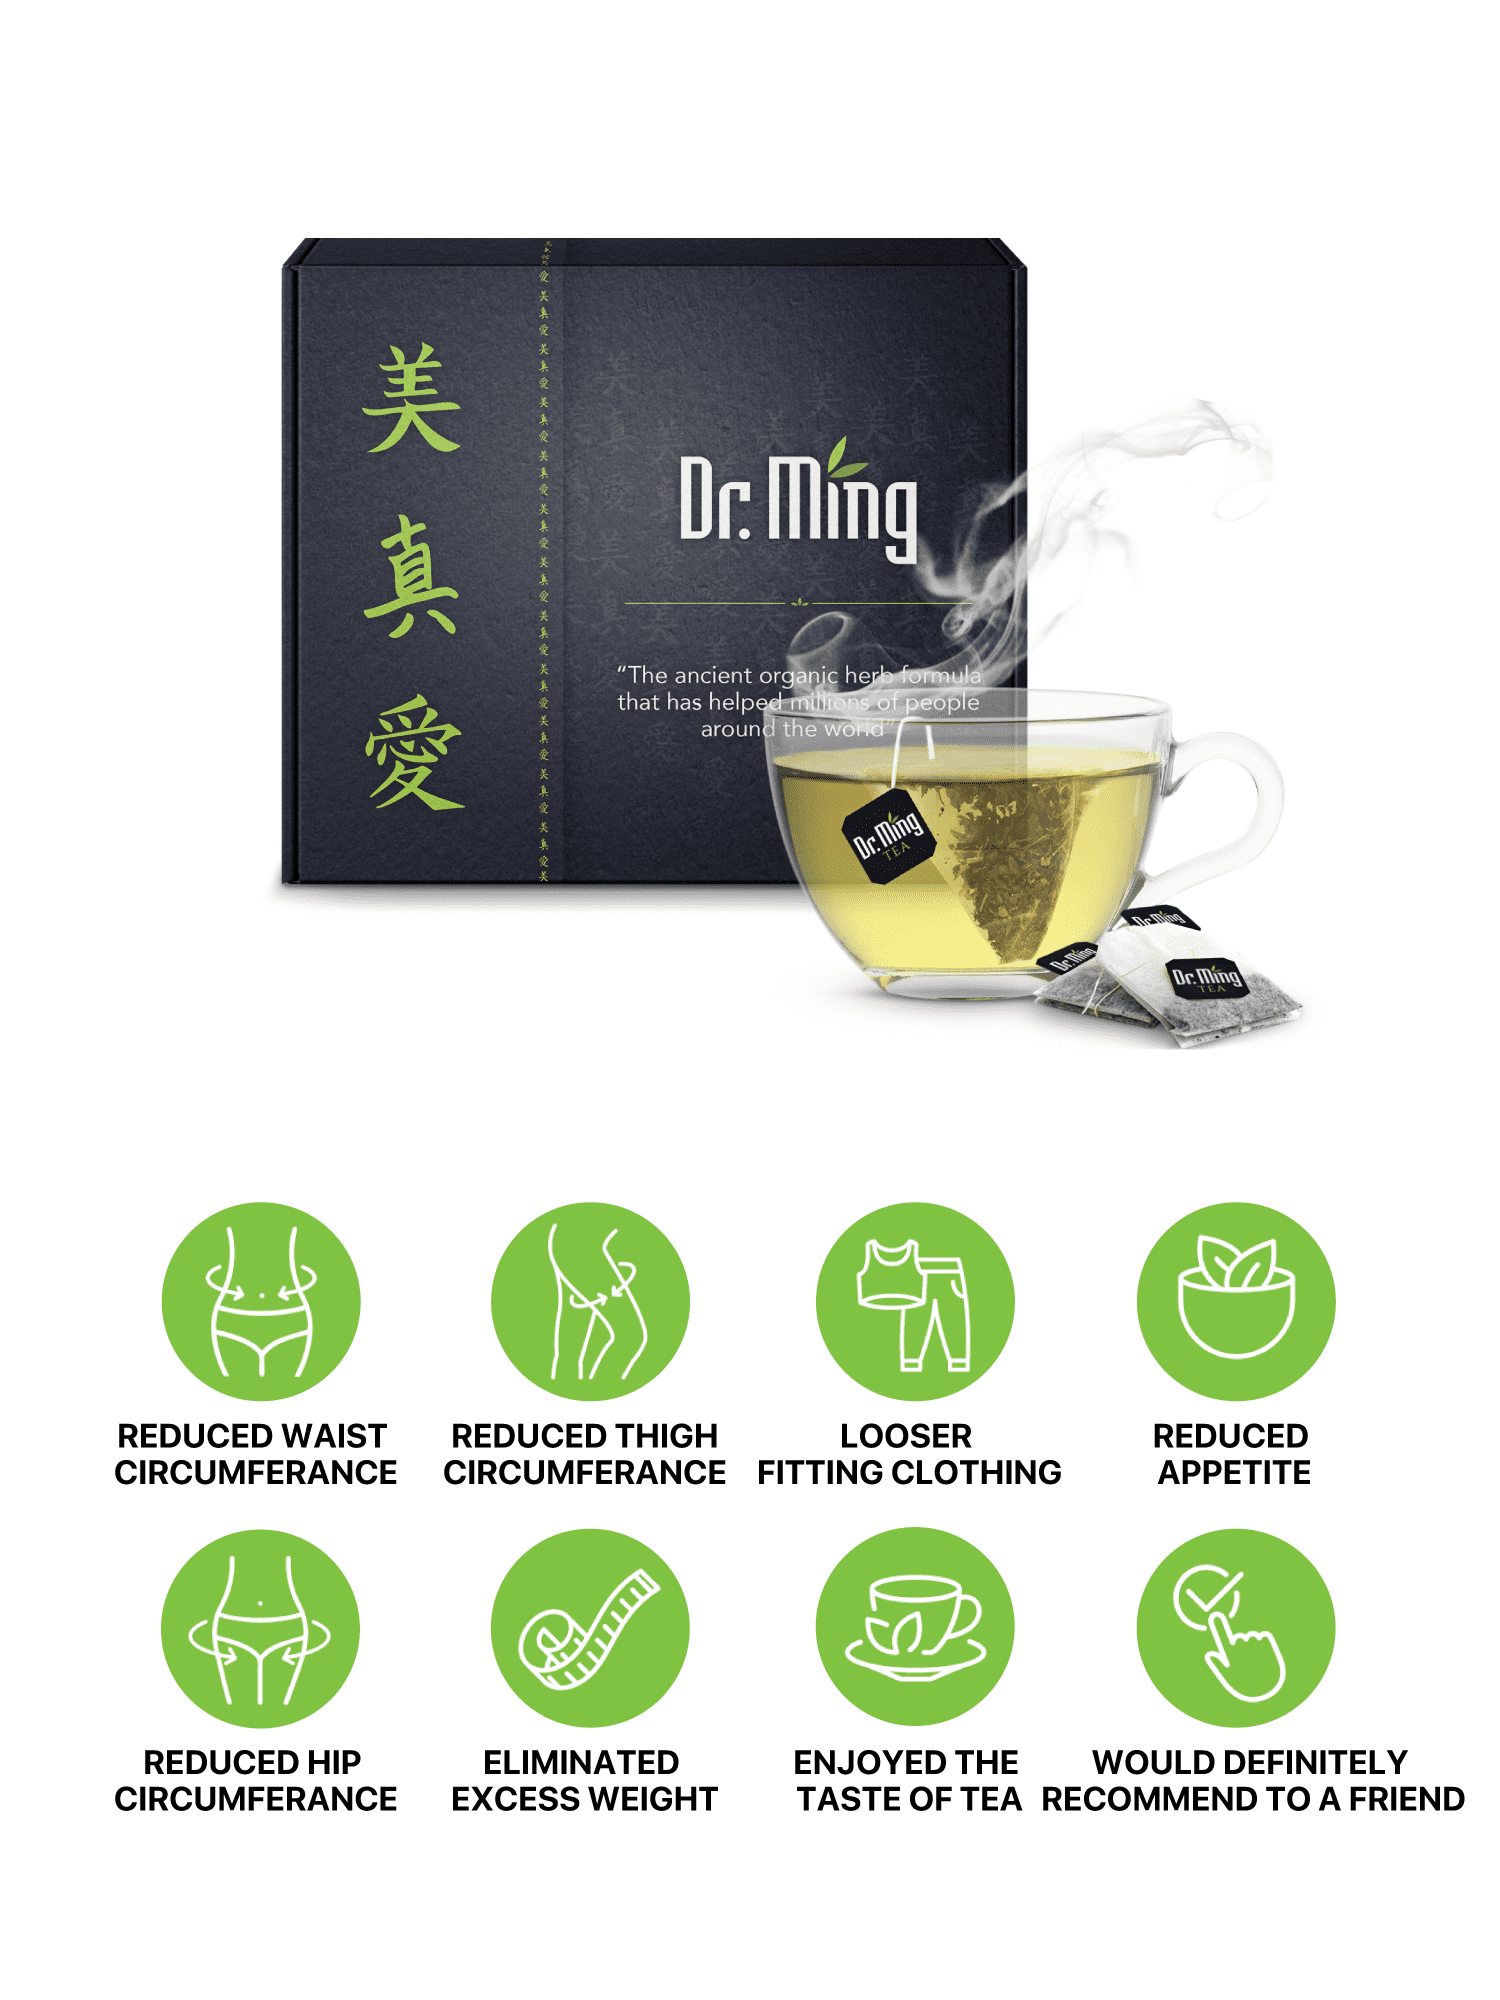 Dr. Ming Pineapple and Slimmy Weight Loss Tea (30-Day Supply)